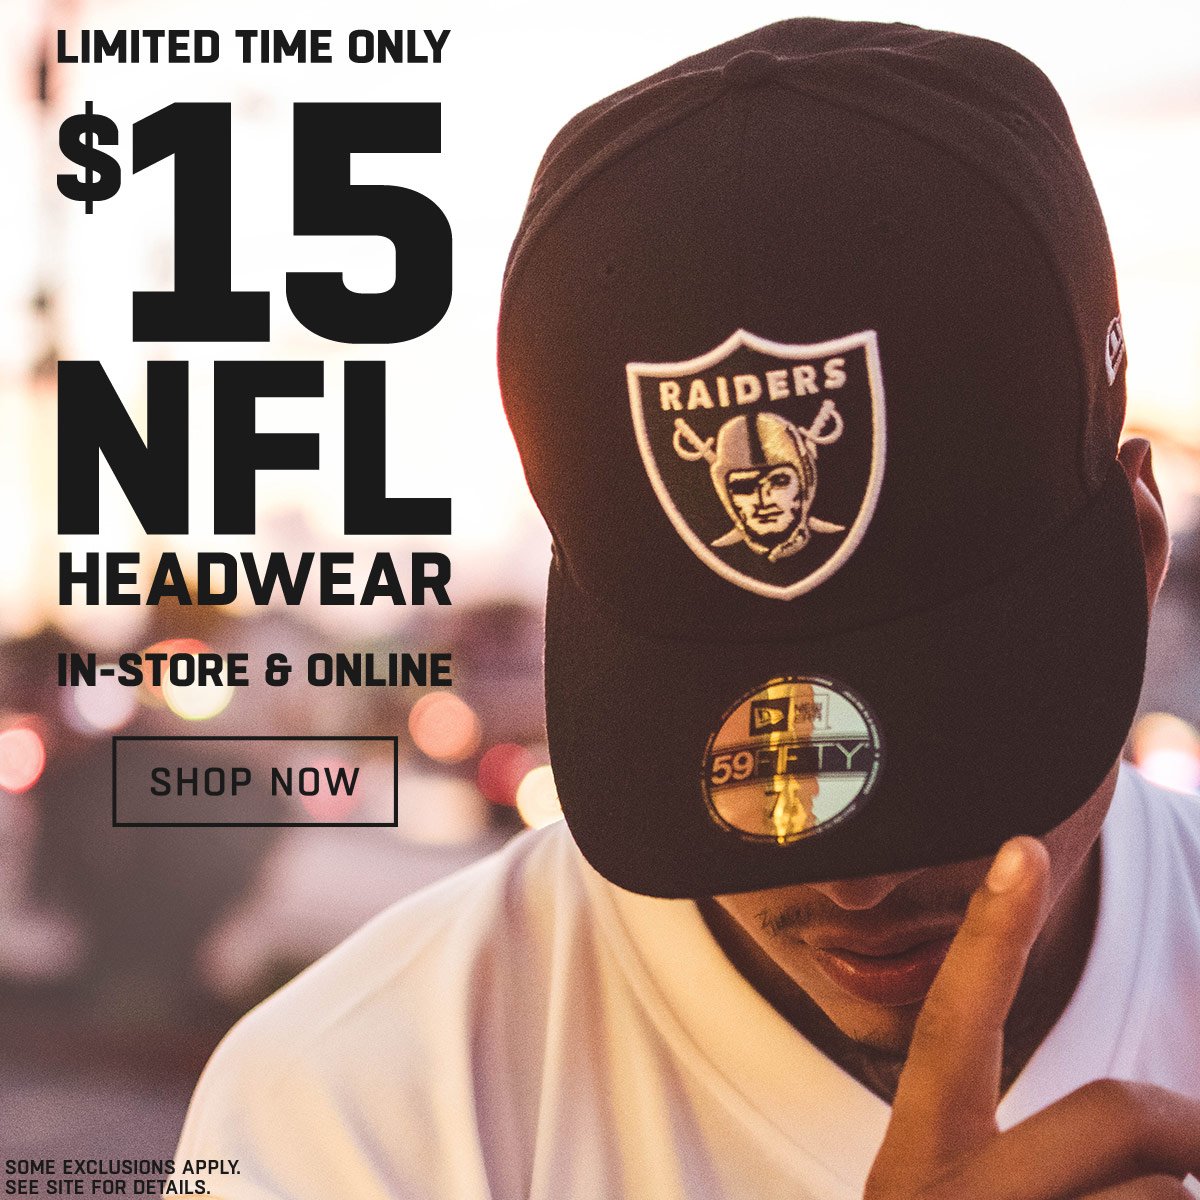 Limited Time Only $15 NFL Headwear